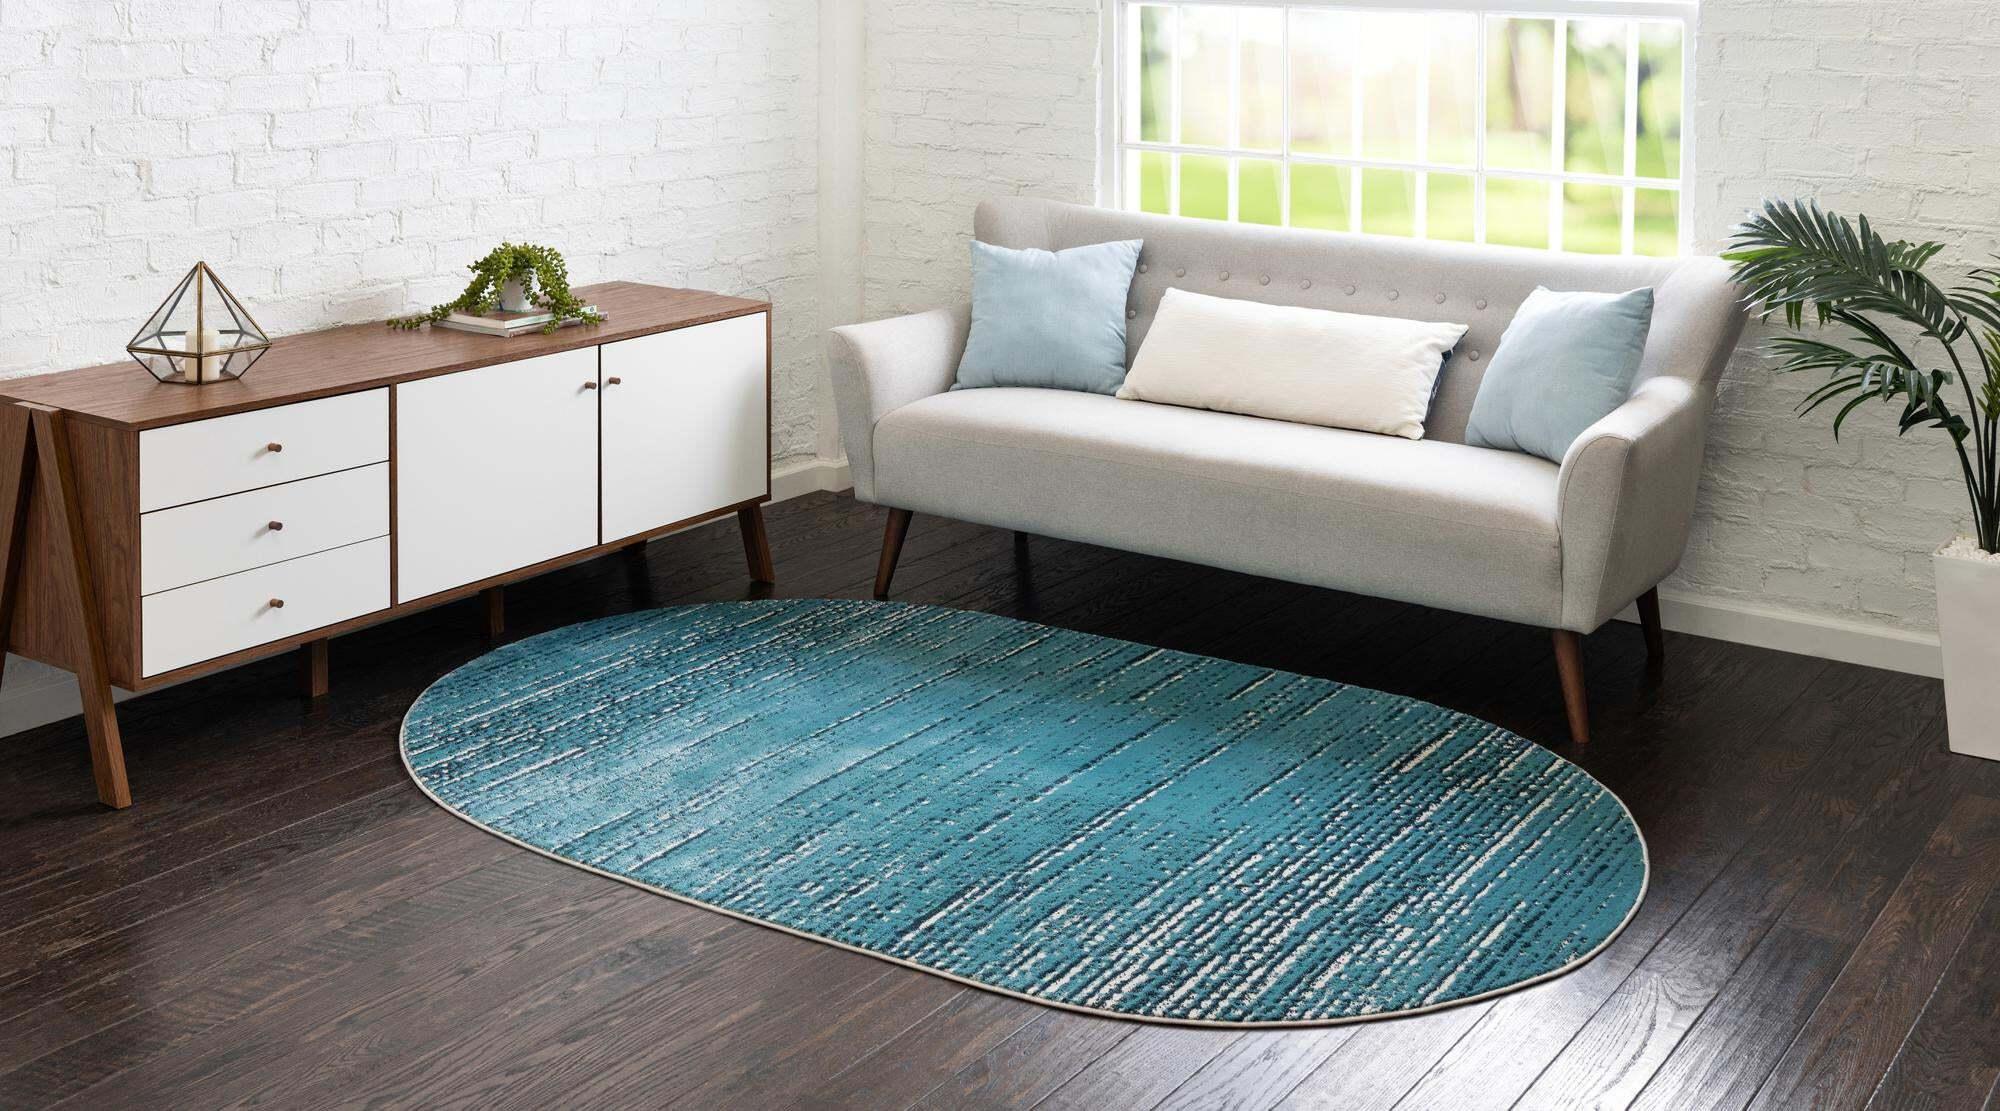 Unique Loom Indoor Rugs - Oasis Abstract Oval 8x10 Oval Rug Blue & Ivory